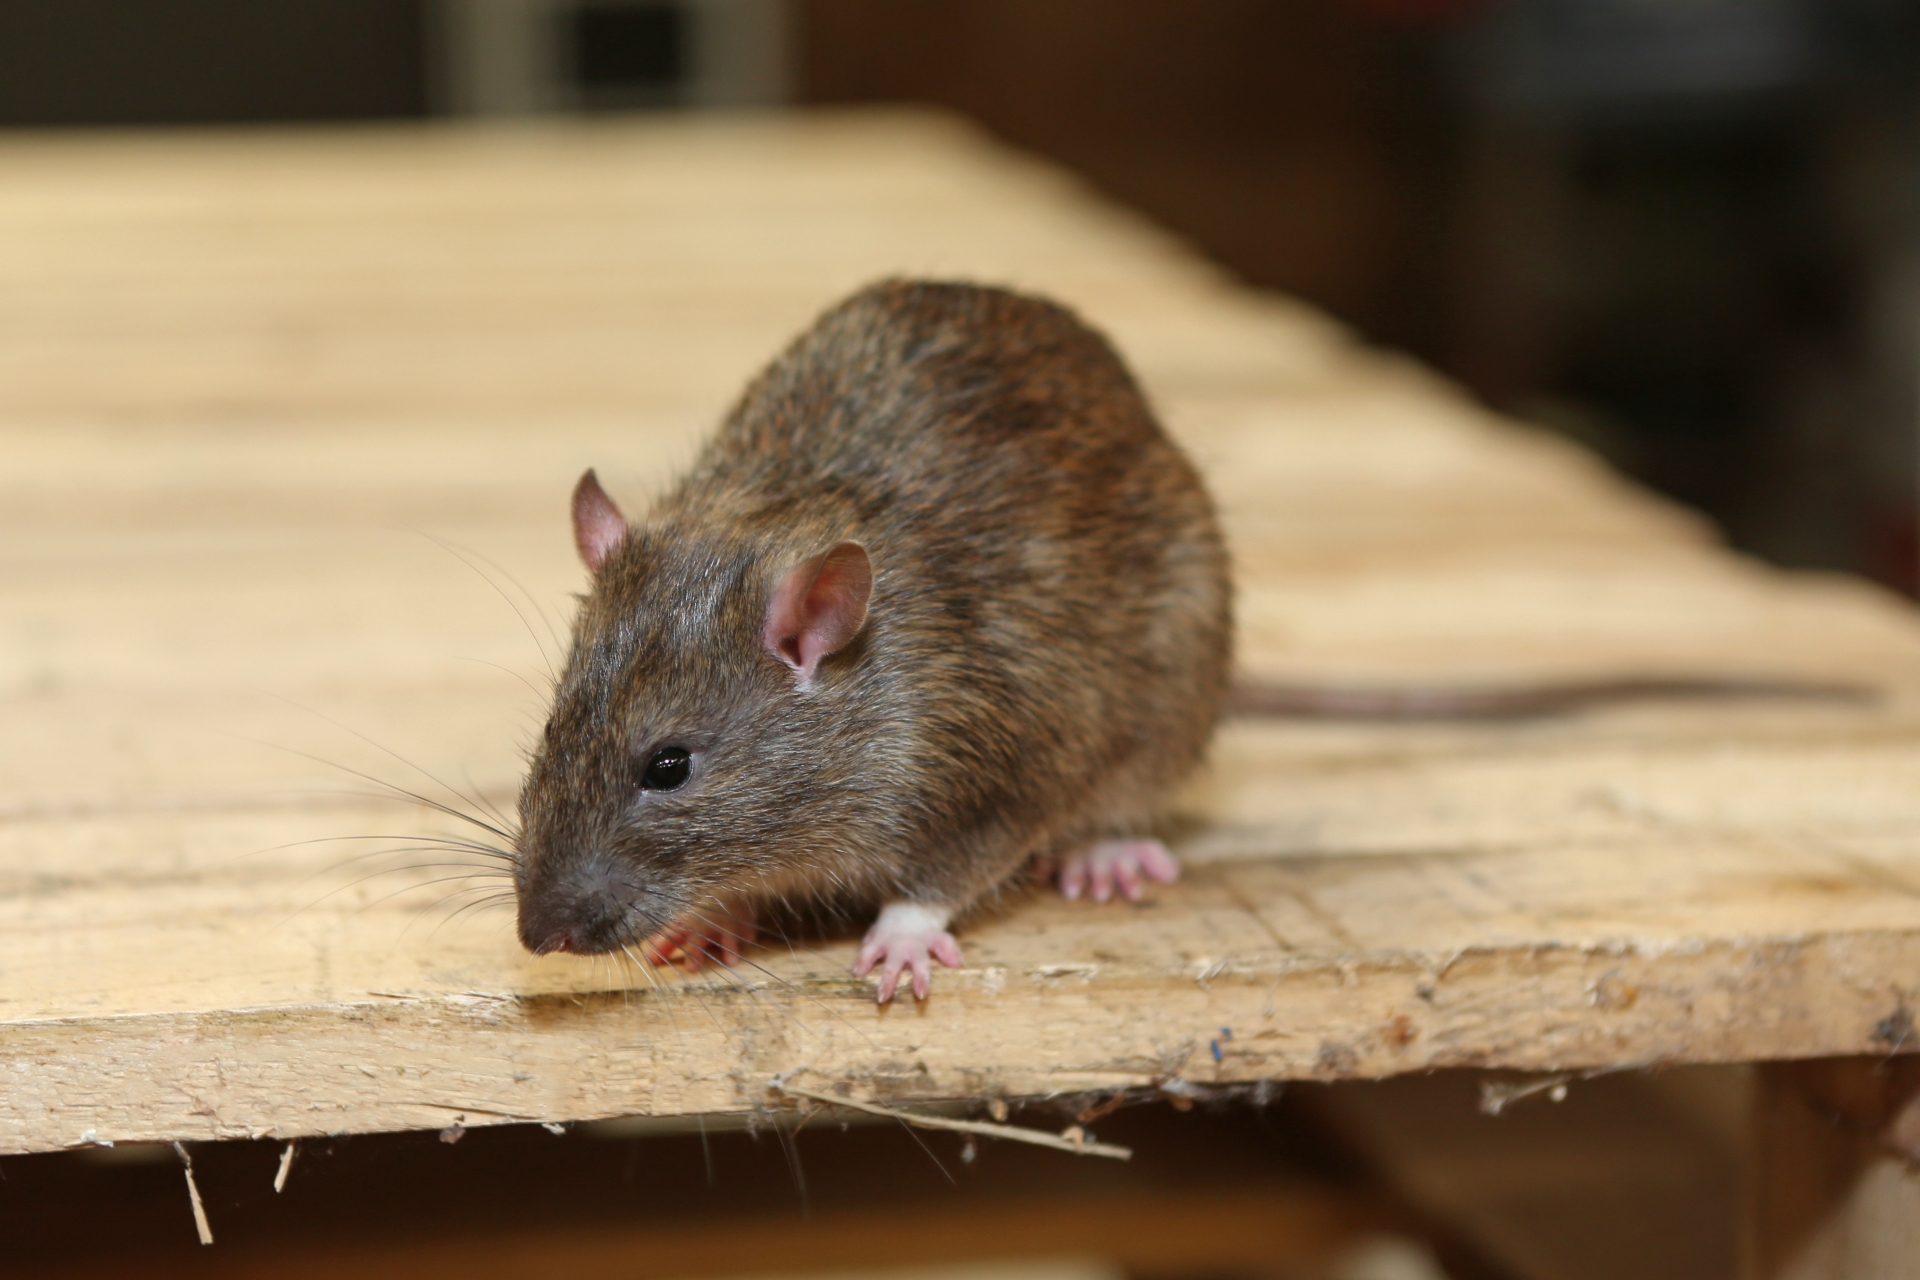 Rat Infestation, Pest Control in Heston, Osterley, TW5. Call Now 020 8166 9746